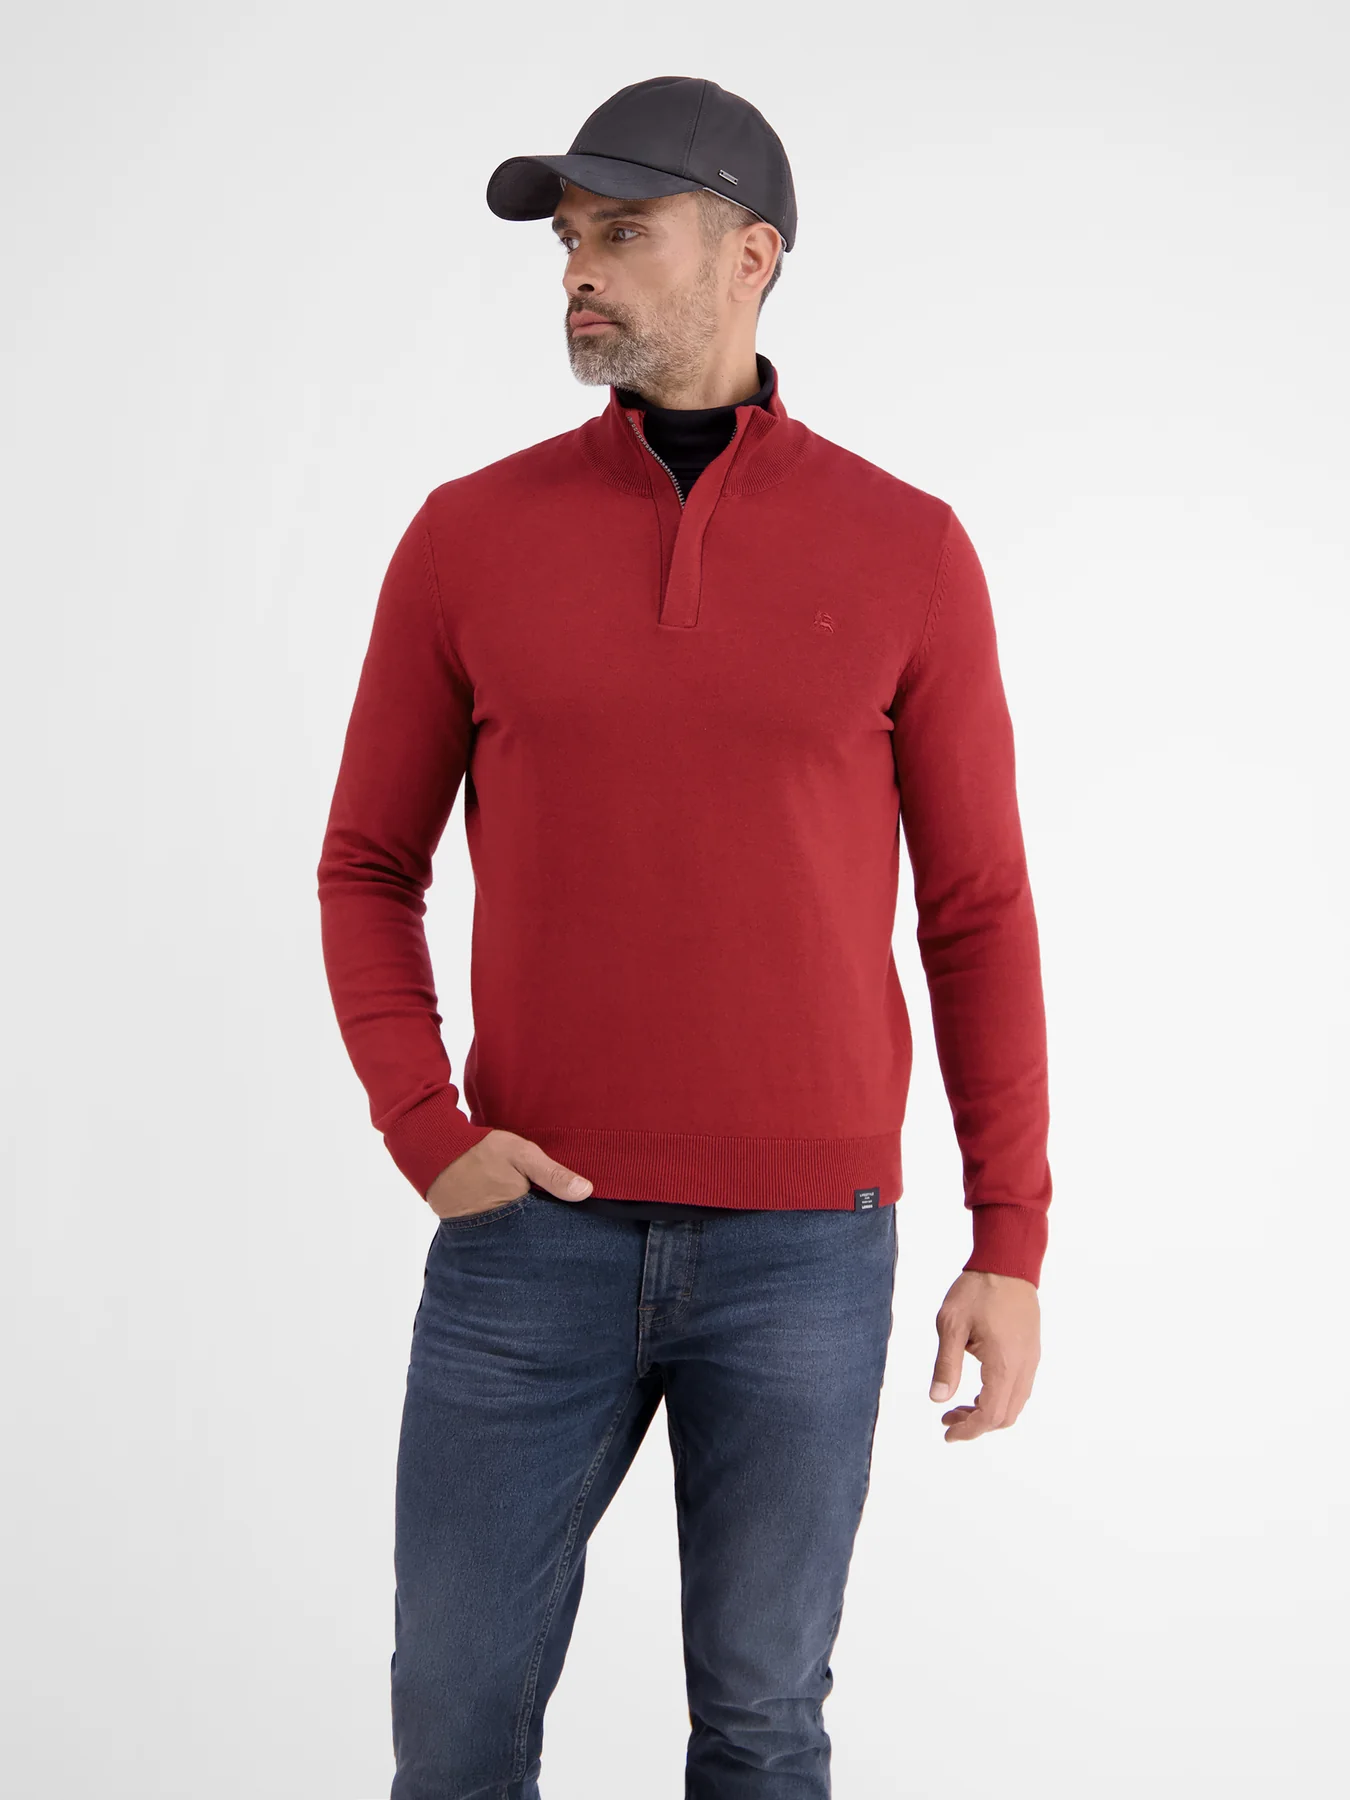 - Strickpullover Design | im Red Troyer Cotton - / Ruby Blues Rot LERROS